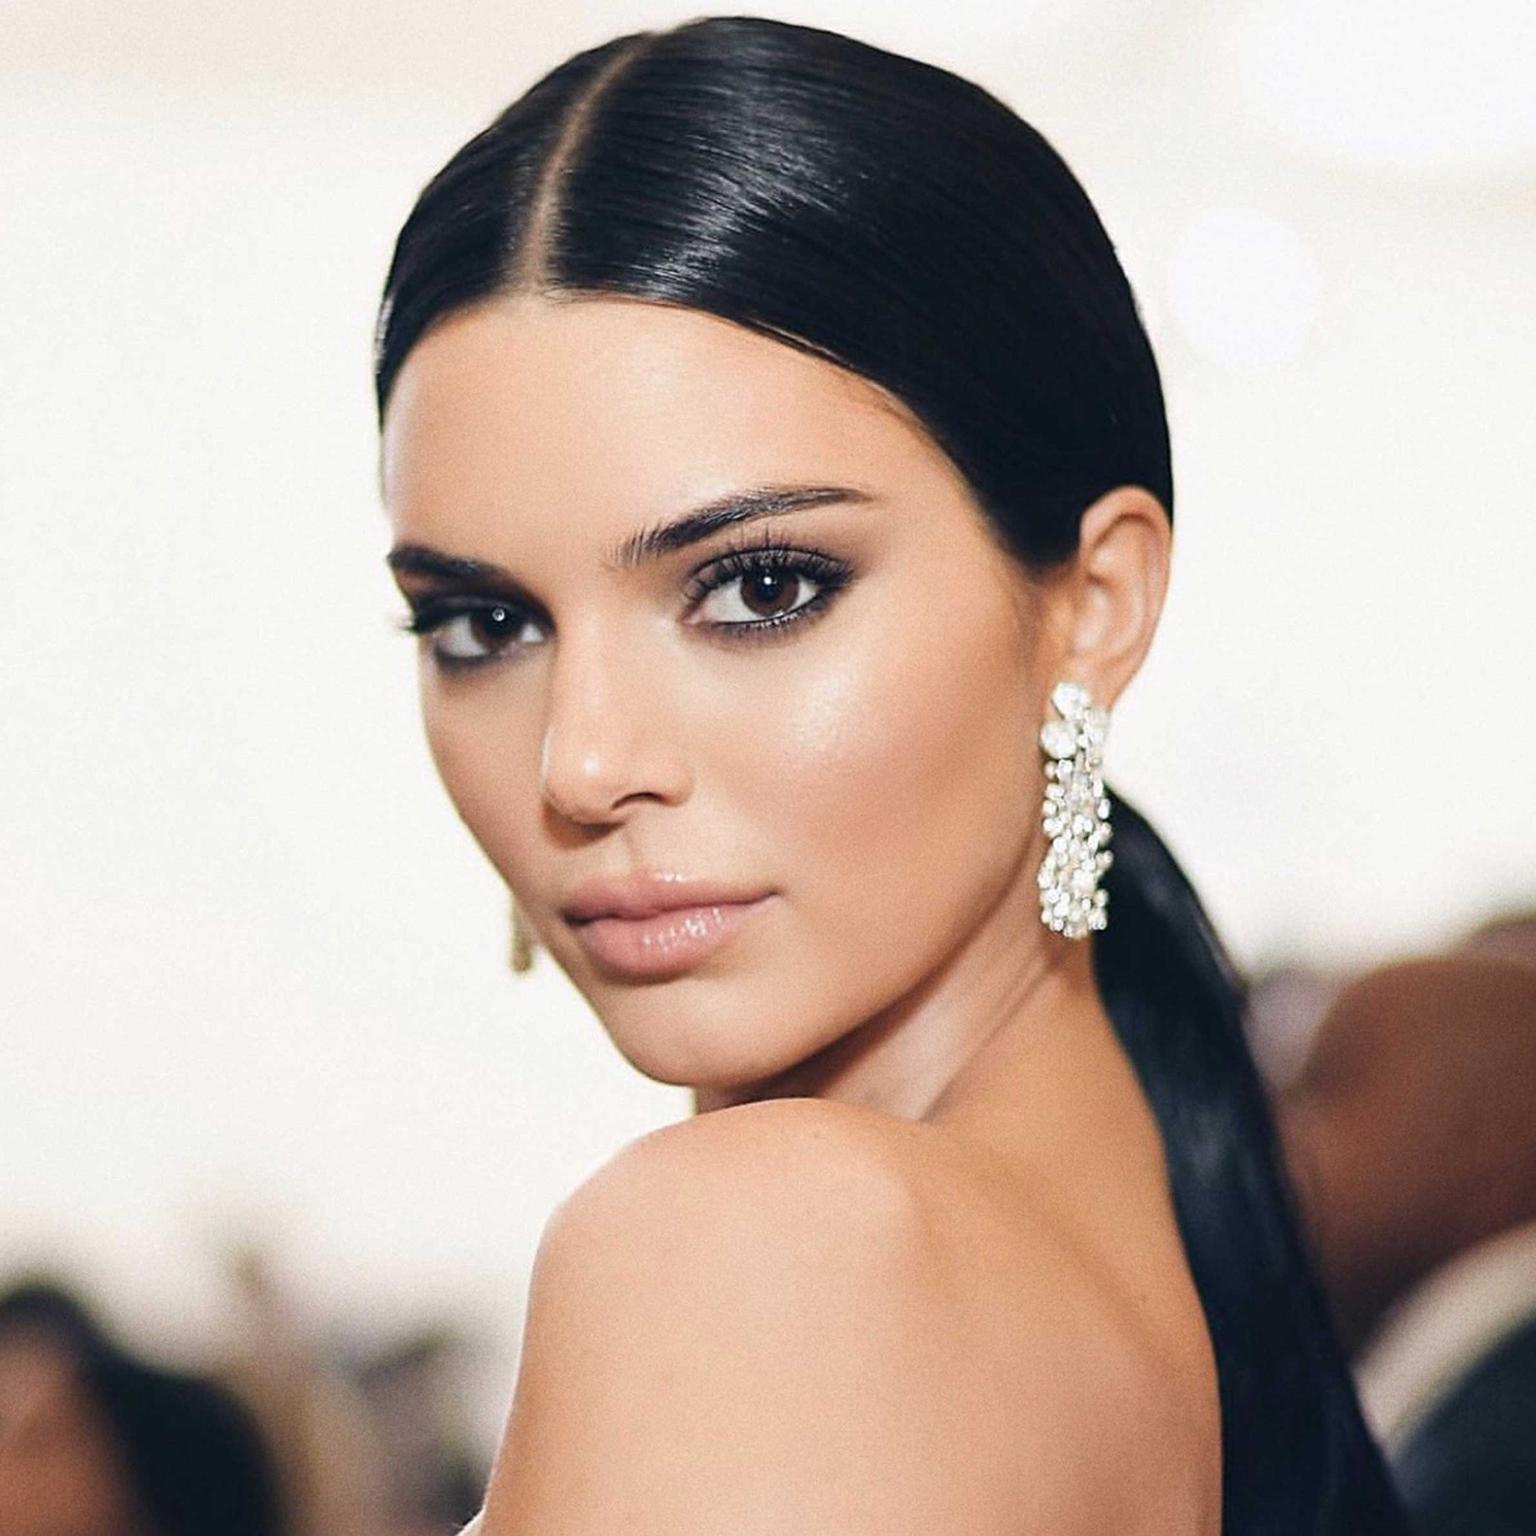 Kendall Jenner wore three Tiffany T white gold and diamond rings to the Met Gala 2018